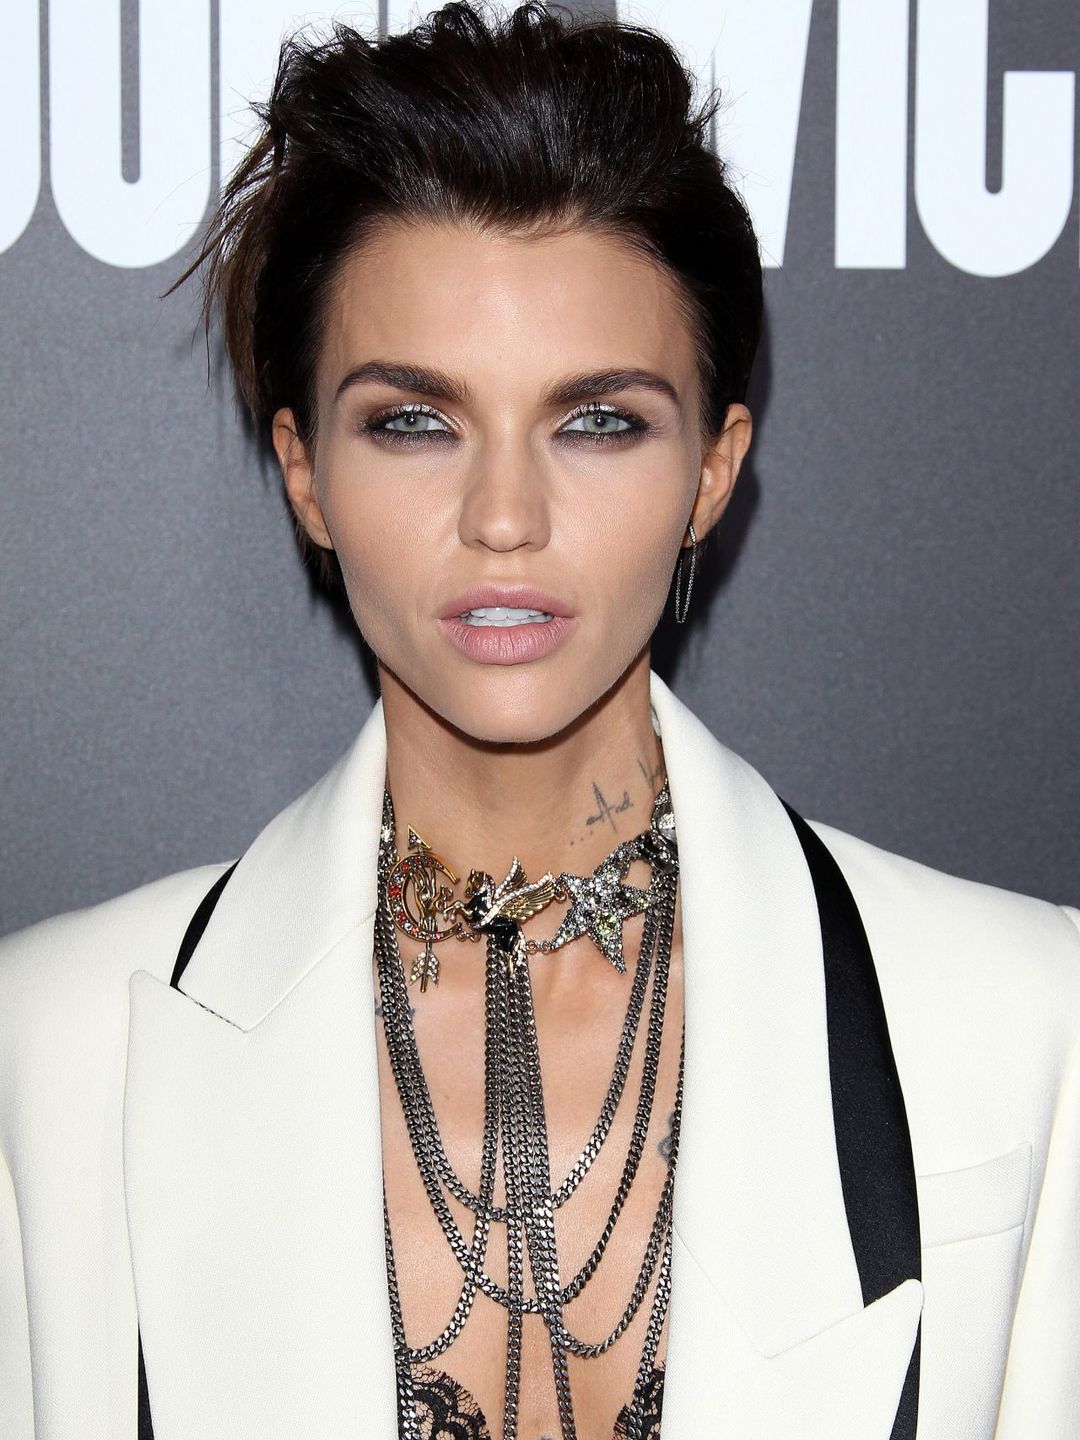 Ruby Rose appearance